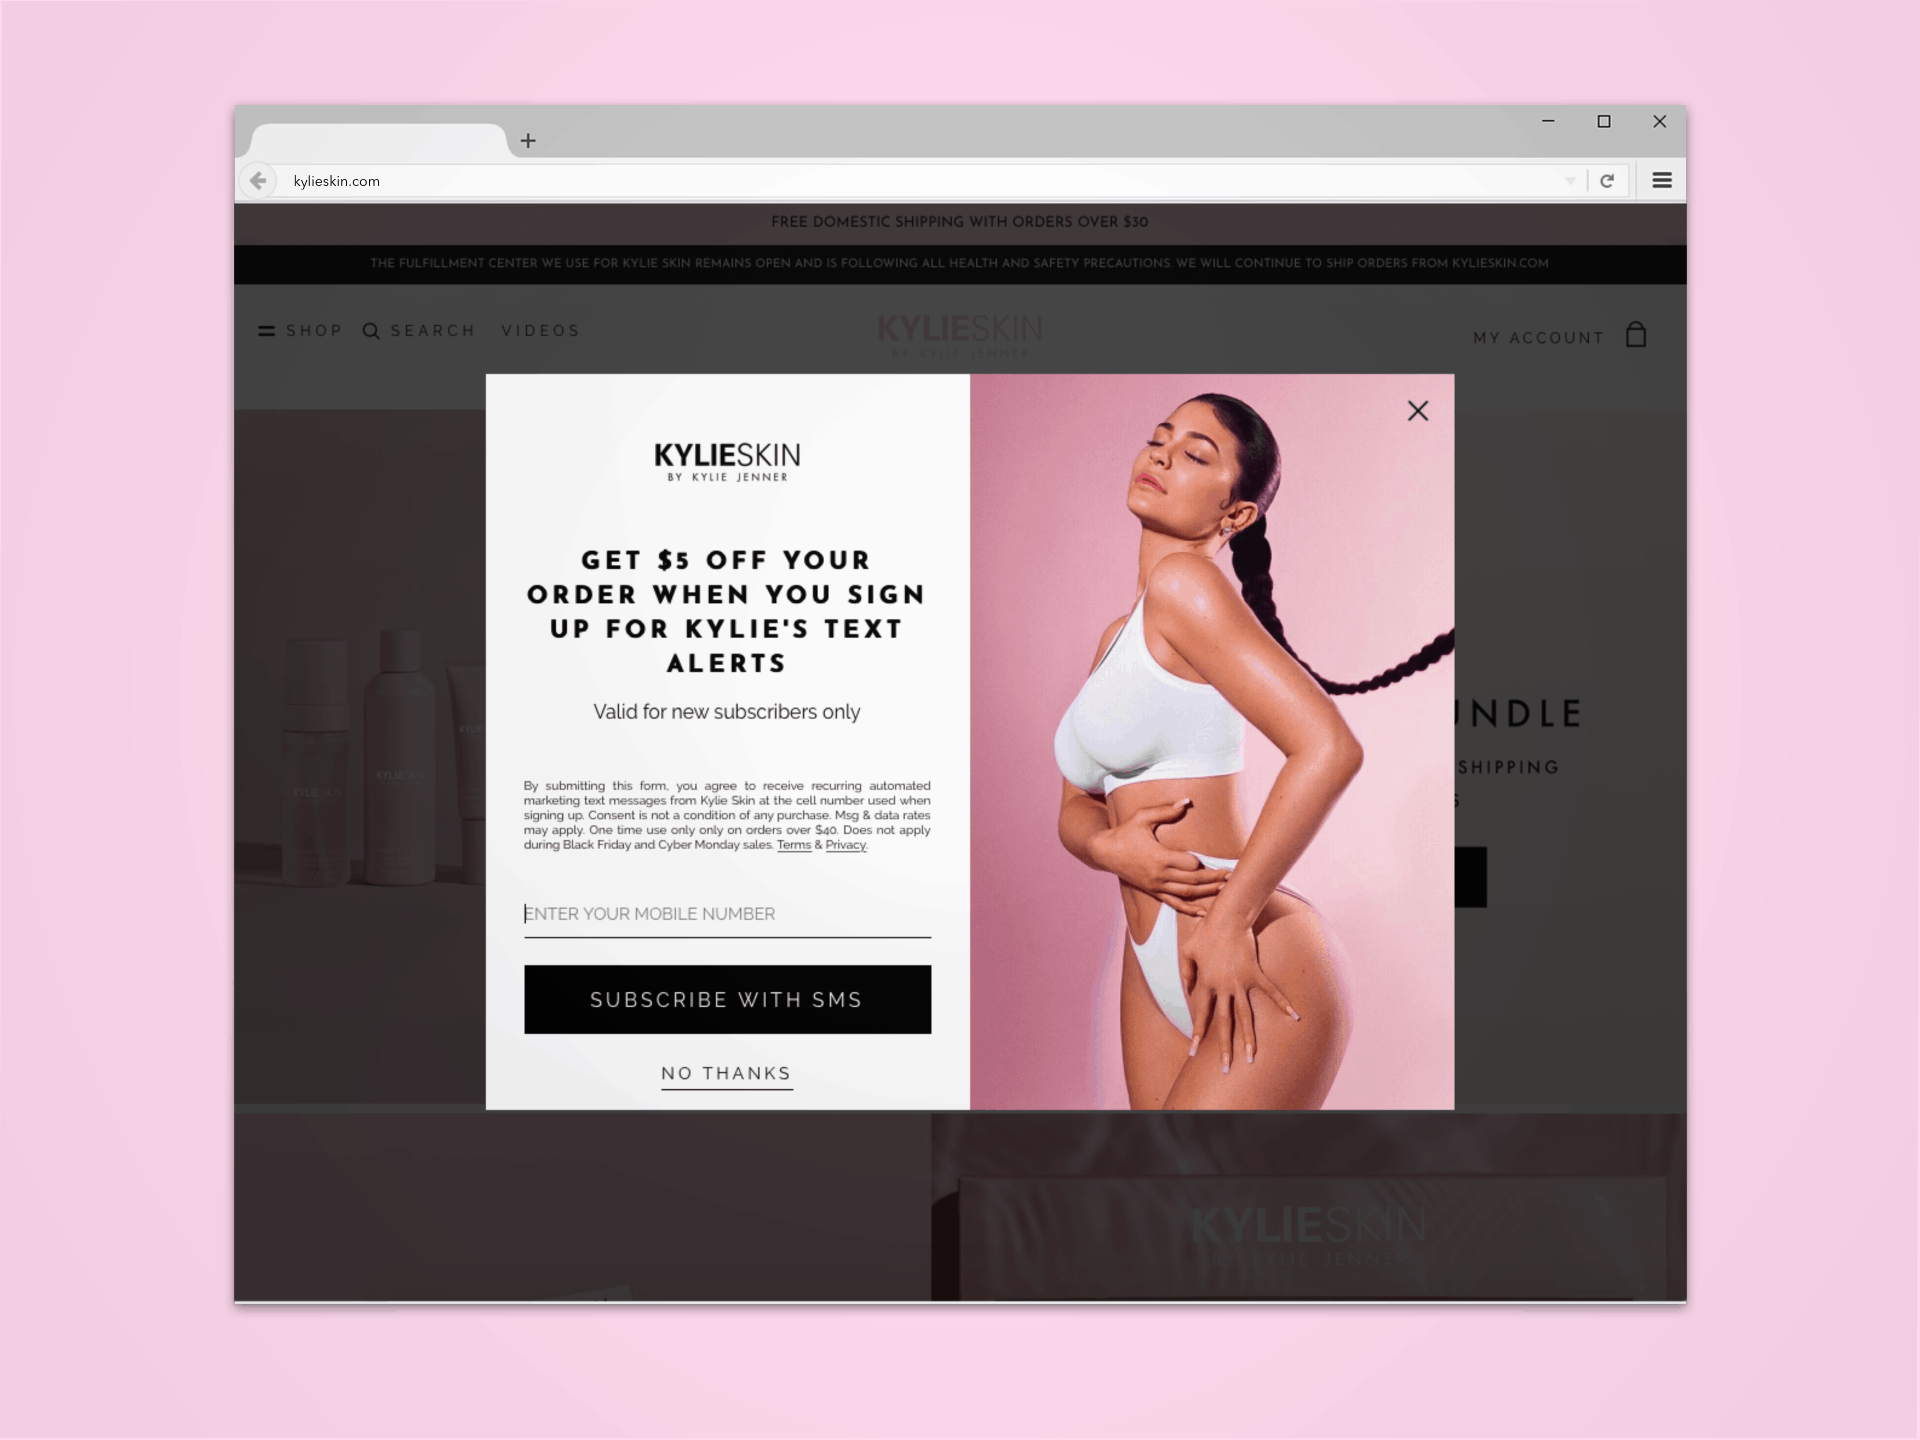 sms marketing pop-up example from kylie skin